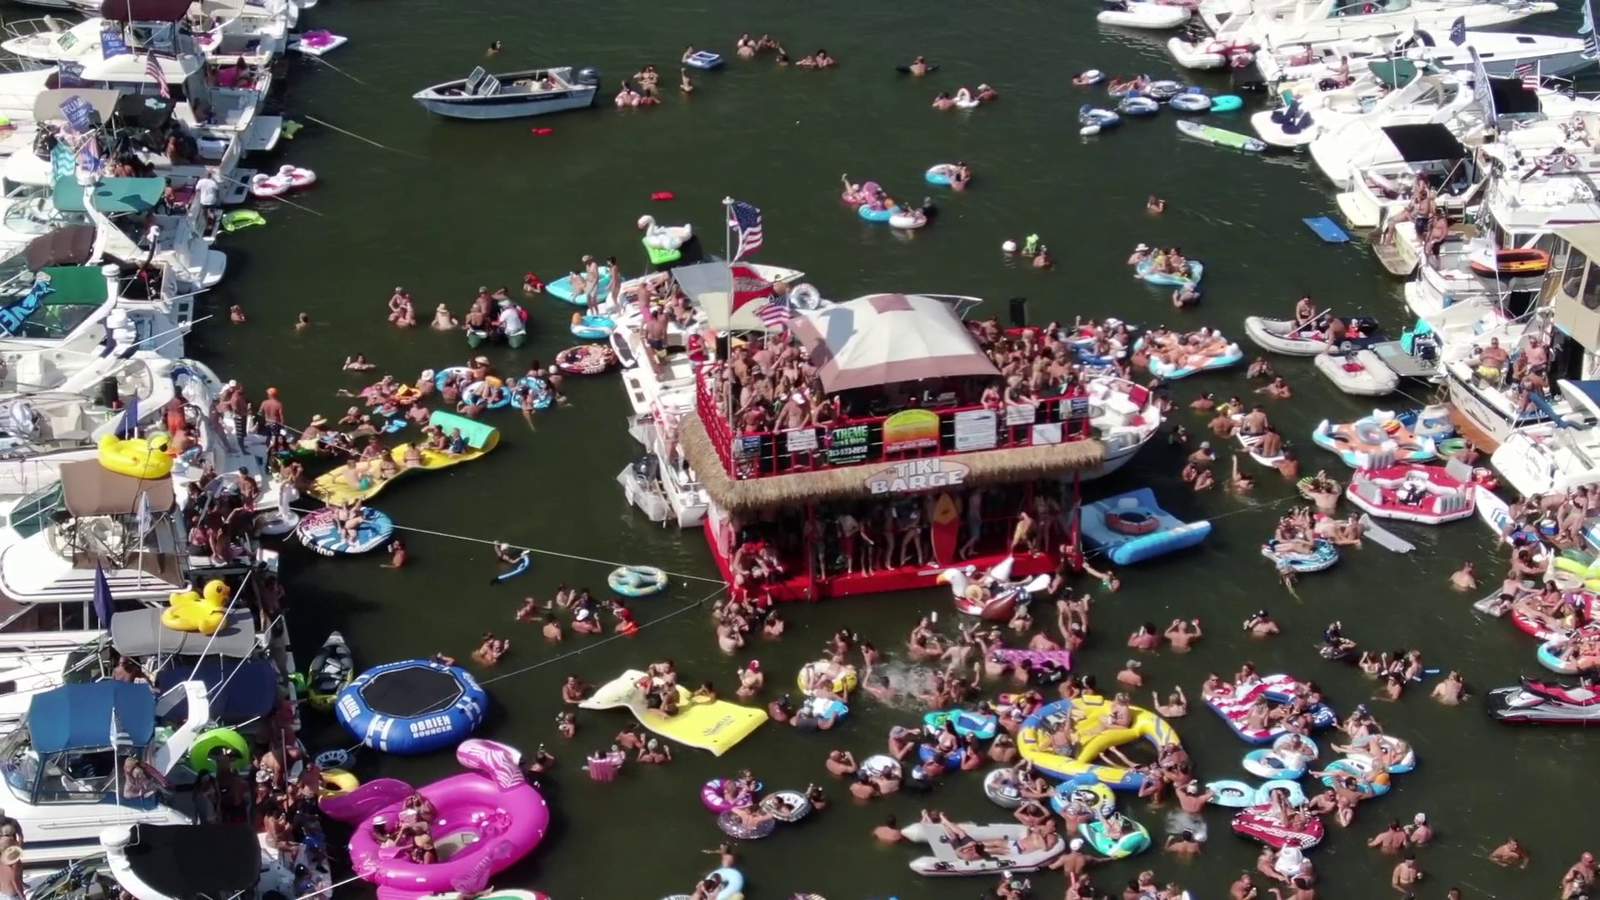 16th annual Raft Off event on Lake St. Clair held despite pandemic